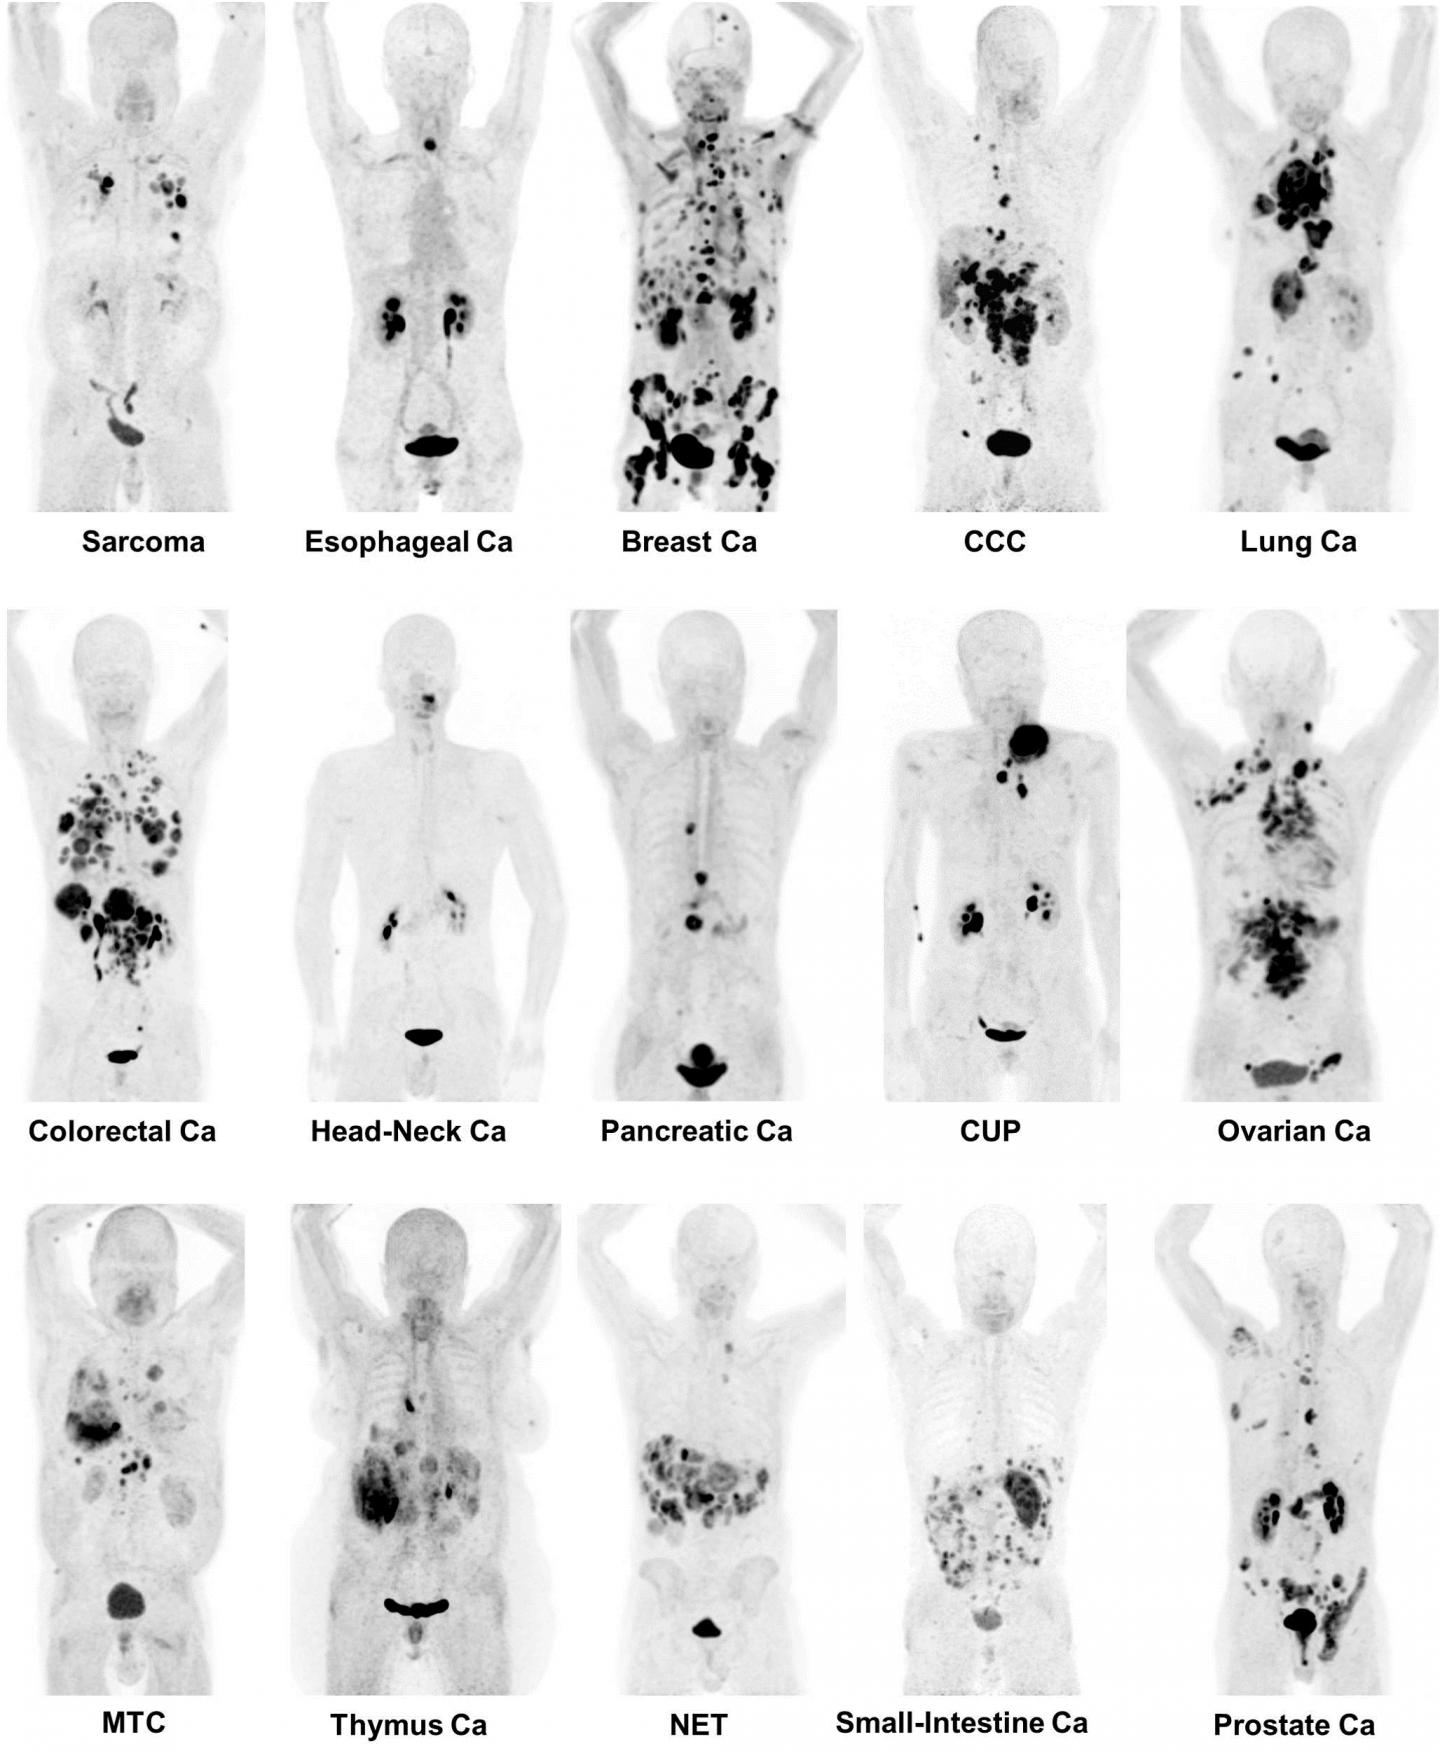 68Ga-FAPI PET/CT in Patients Reflecting 15 Different Tumor Entities